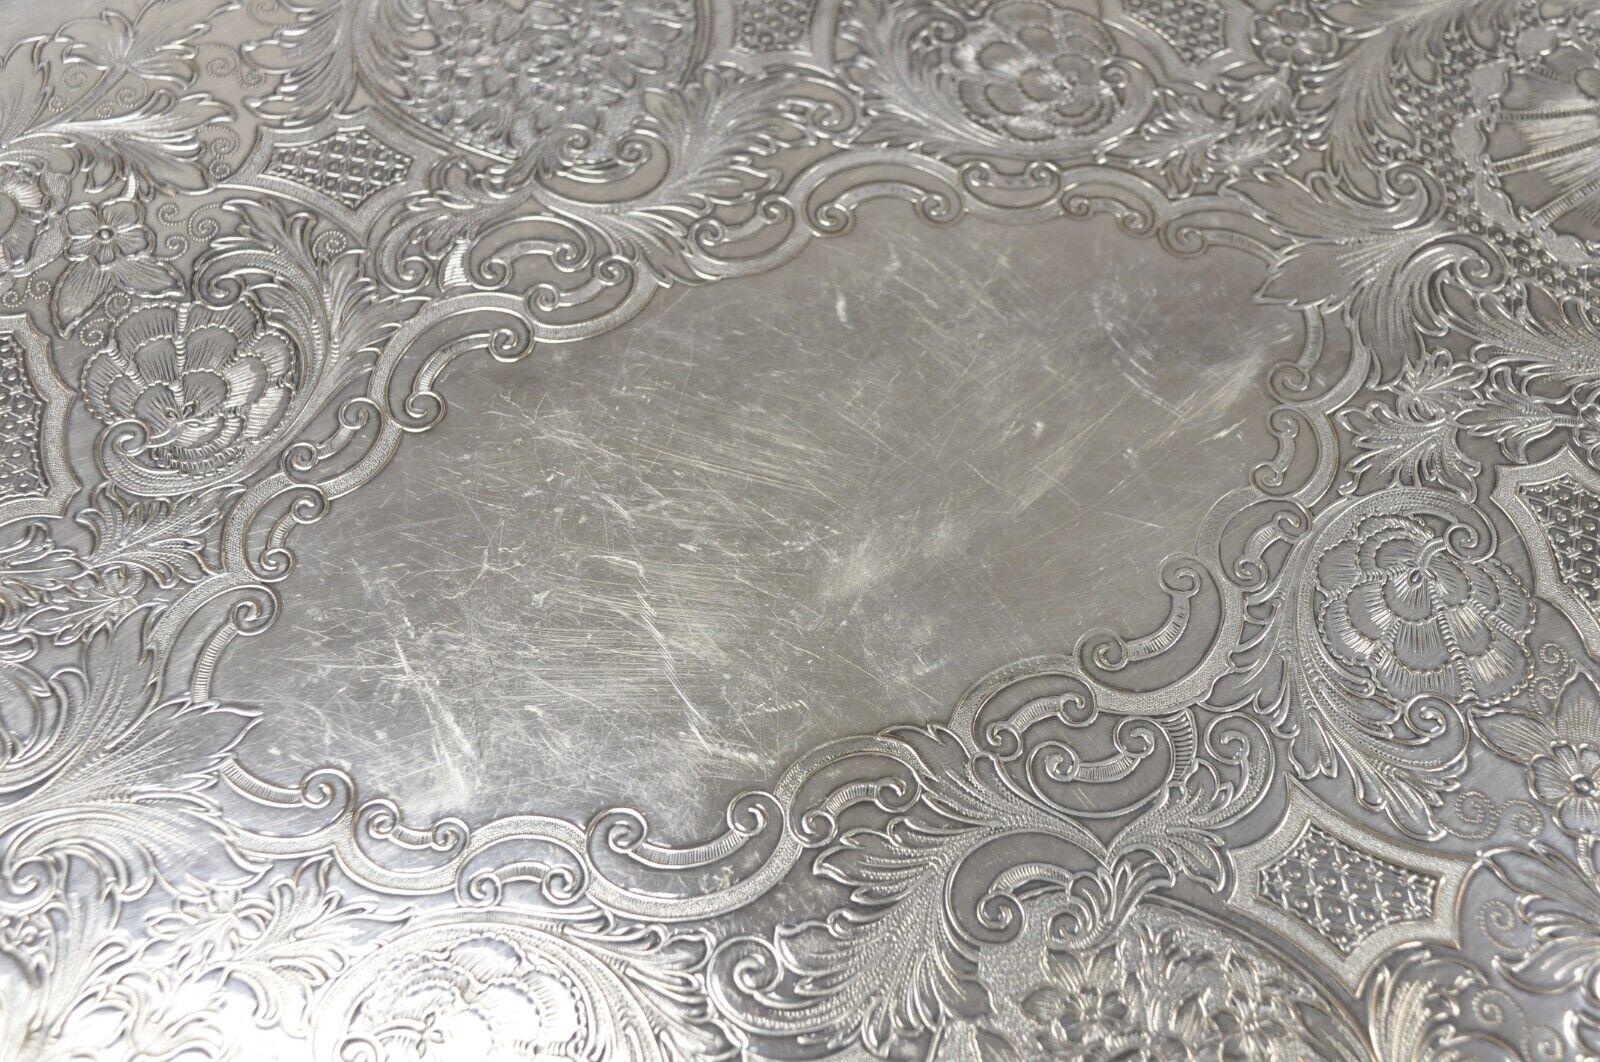 Vintage Heritage 1847 Rogers Bros 9498 Silver Plated Serving Platter Tray For Sale 2